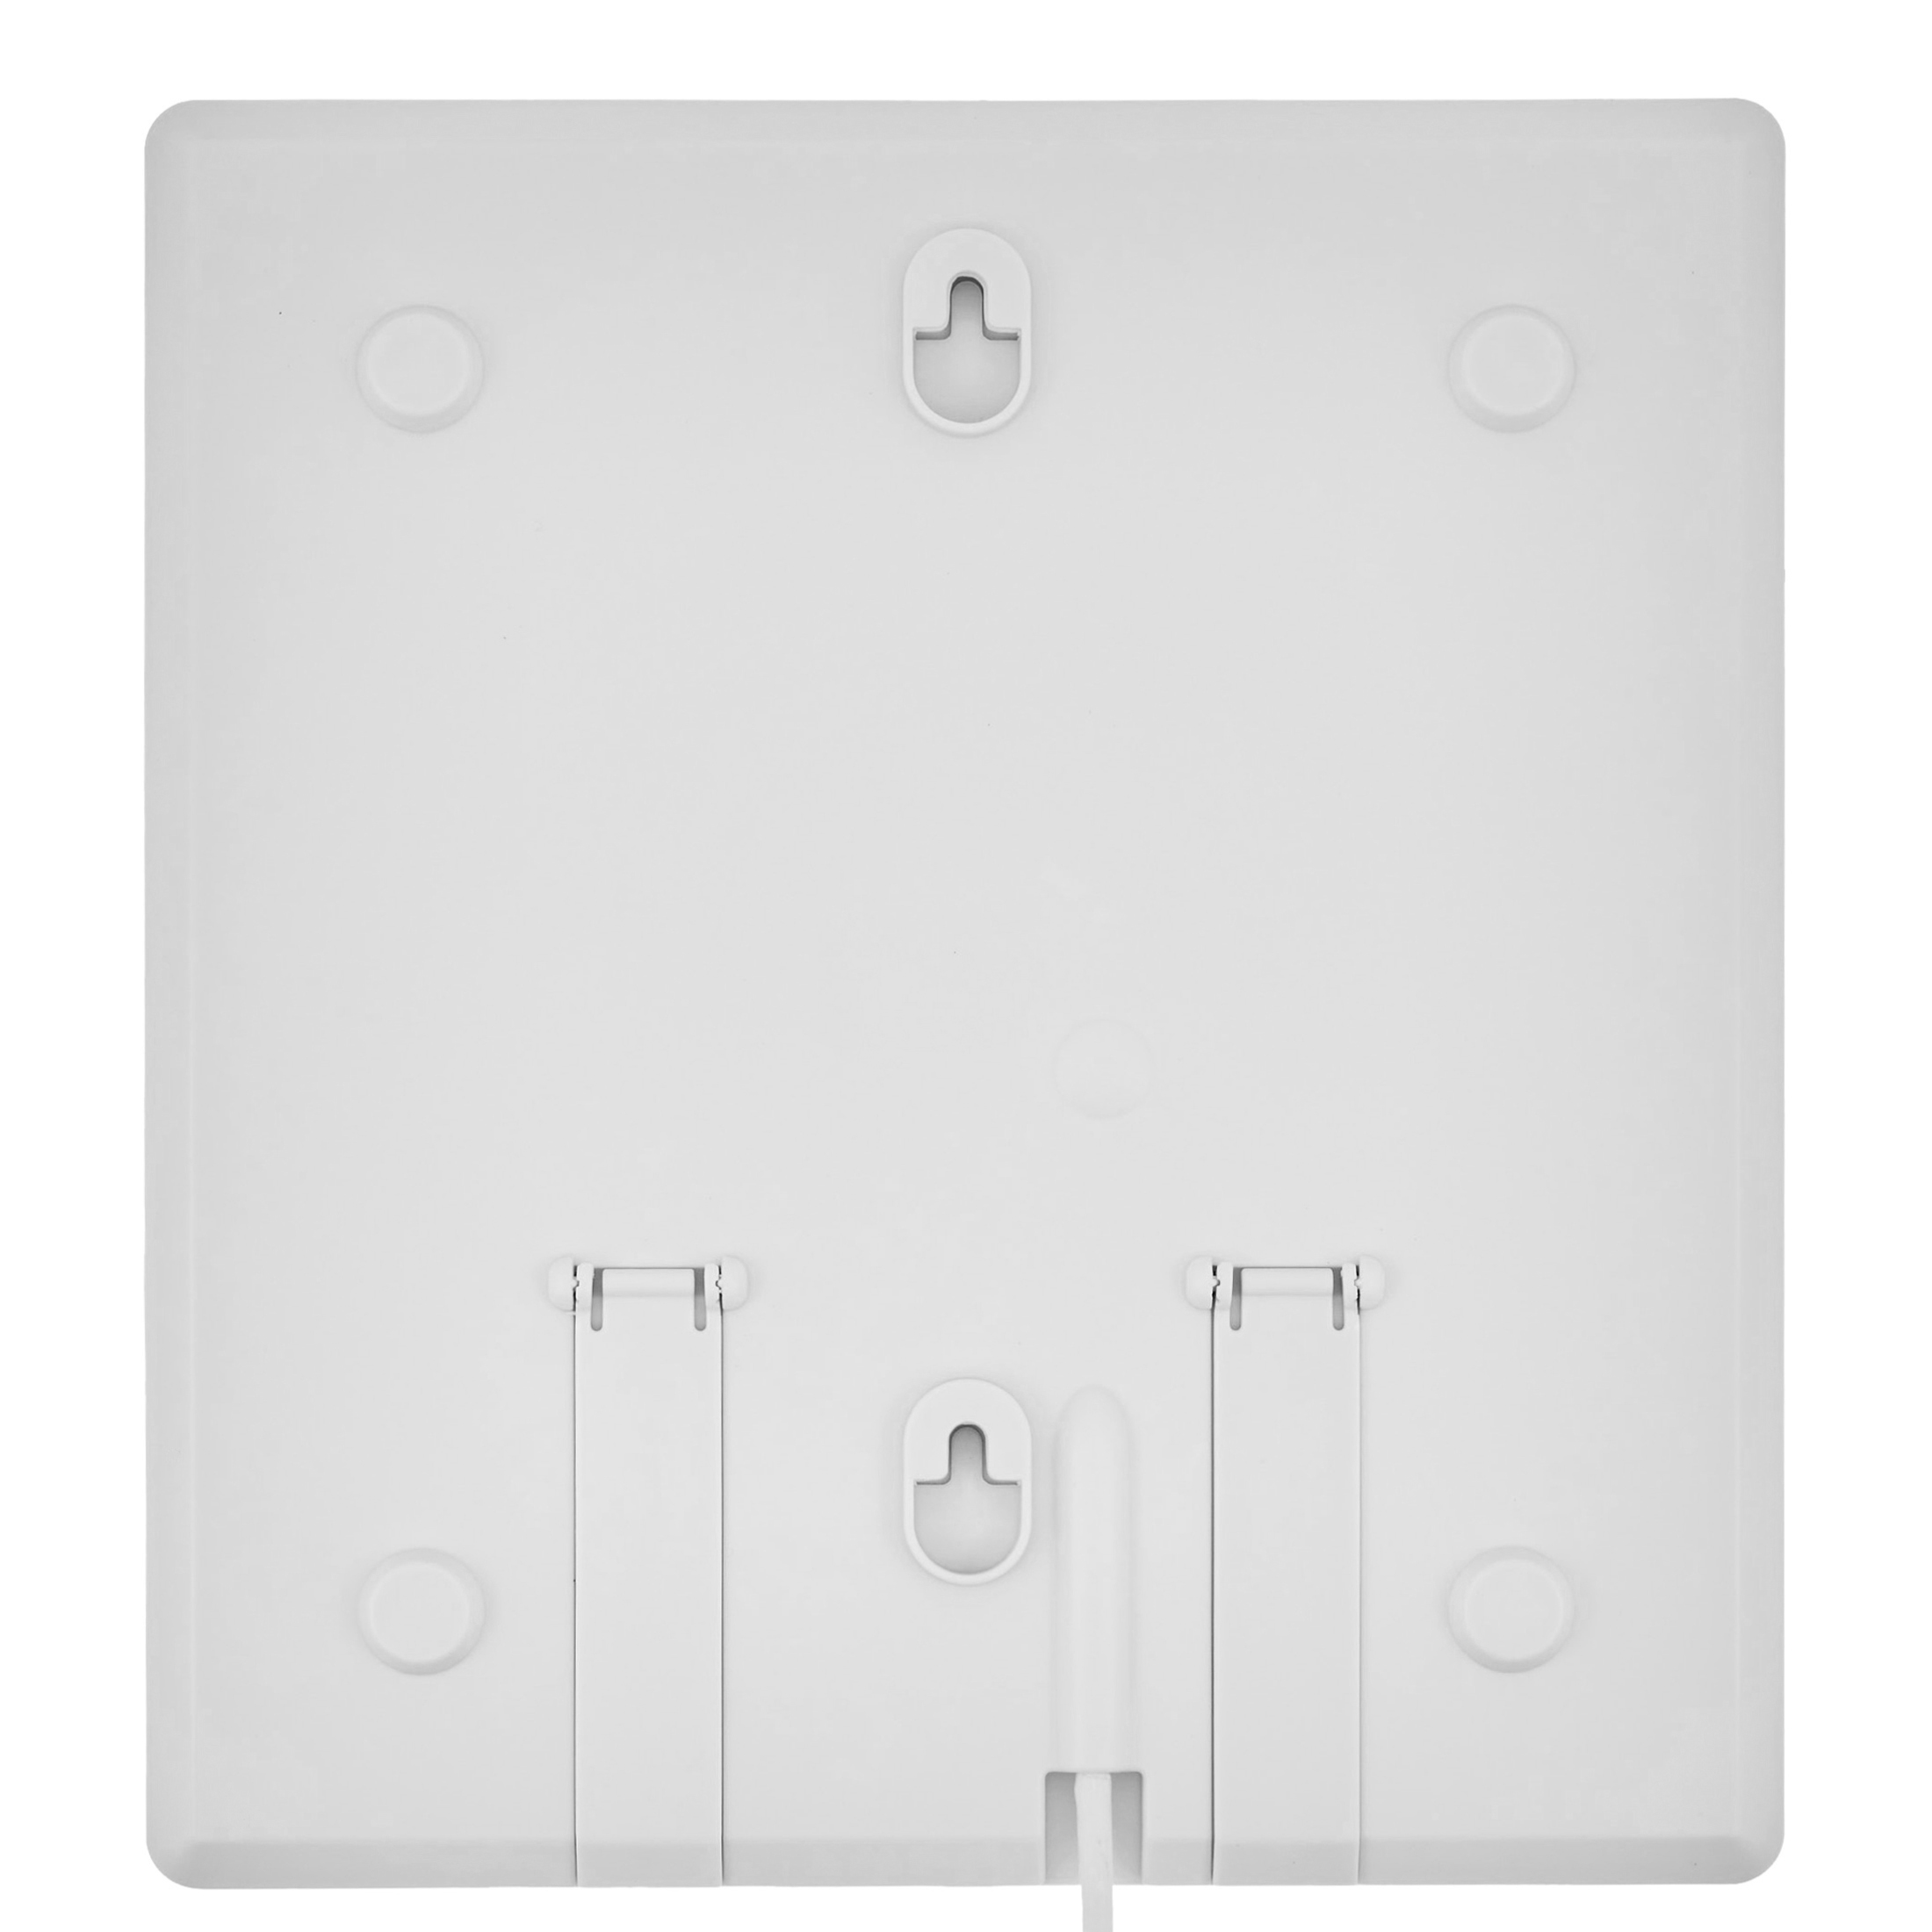 RCA Indoor Flat HDTV Antenna - Multi-Directional - image 5 of 8